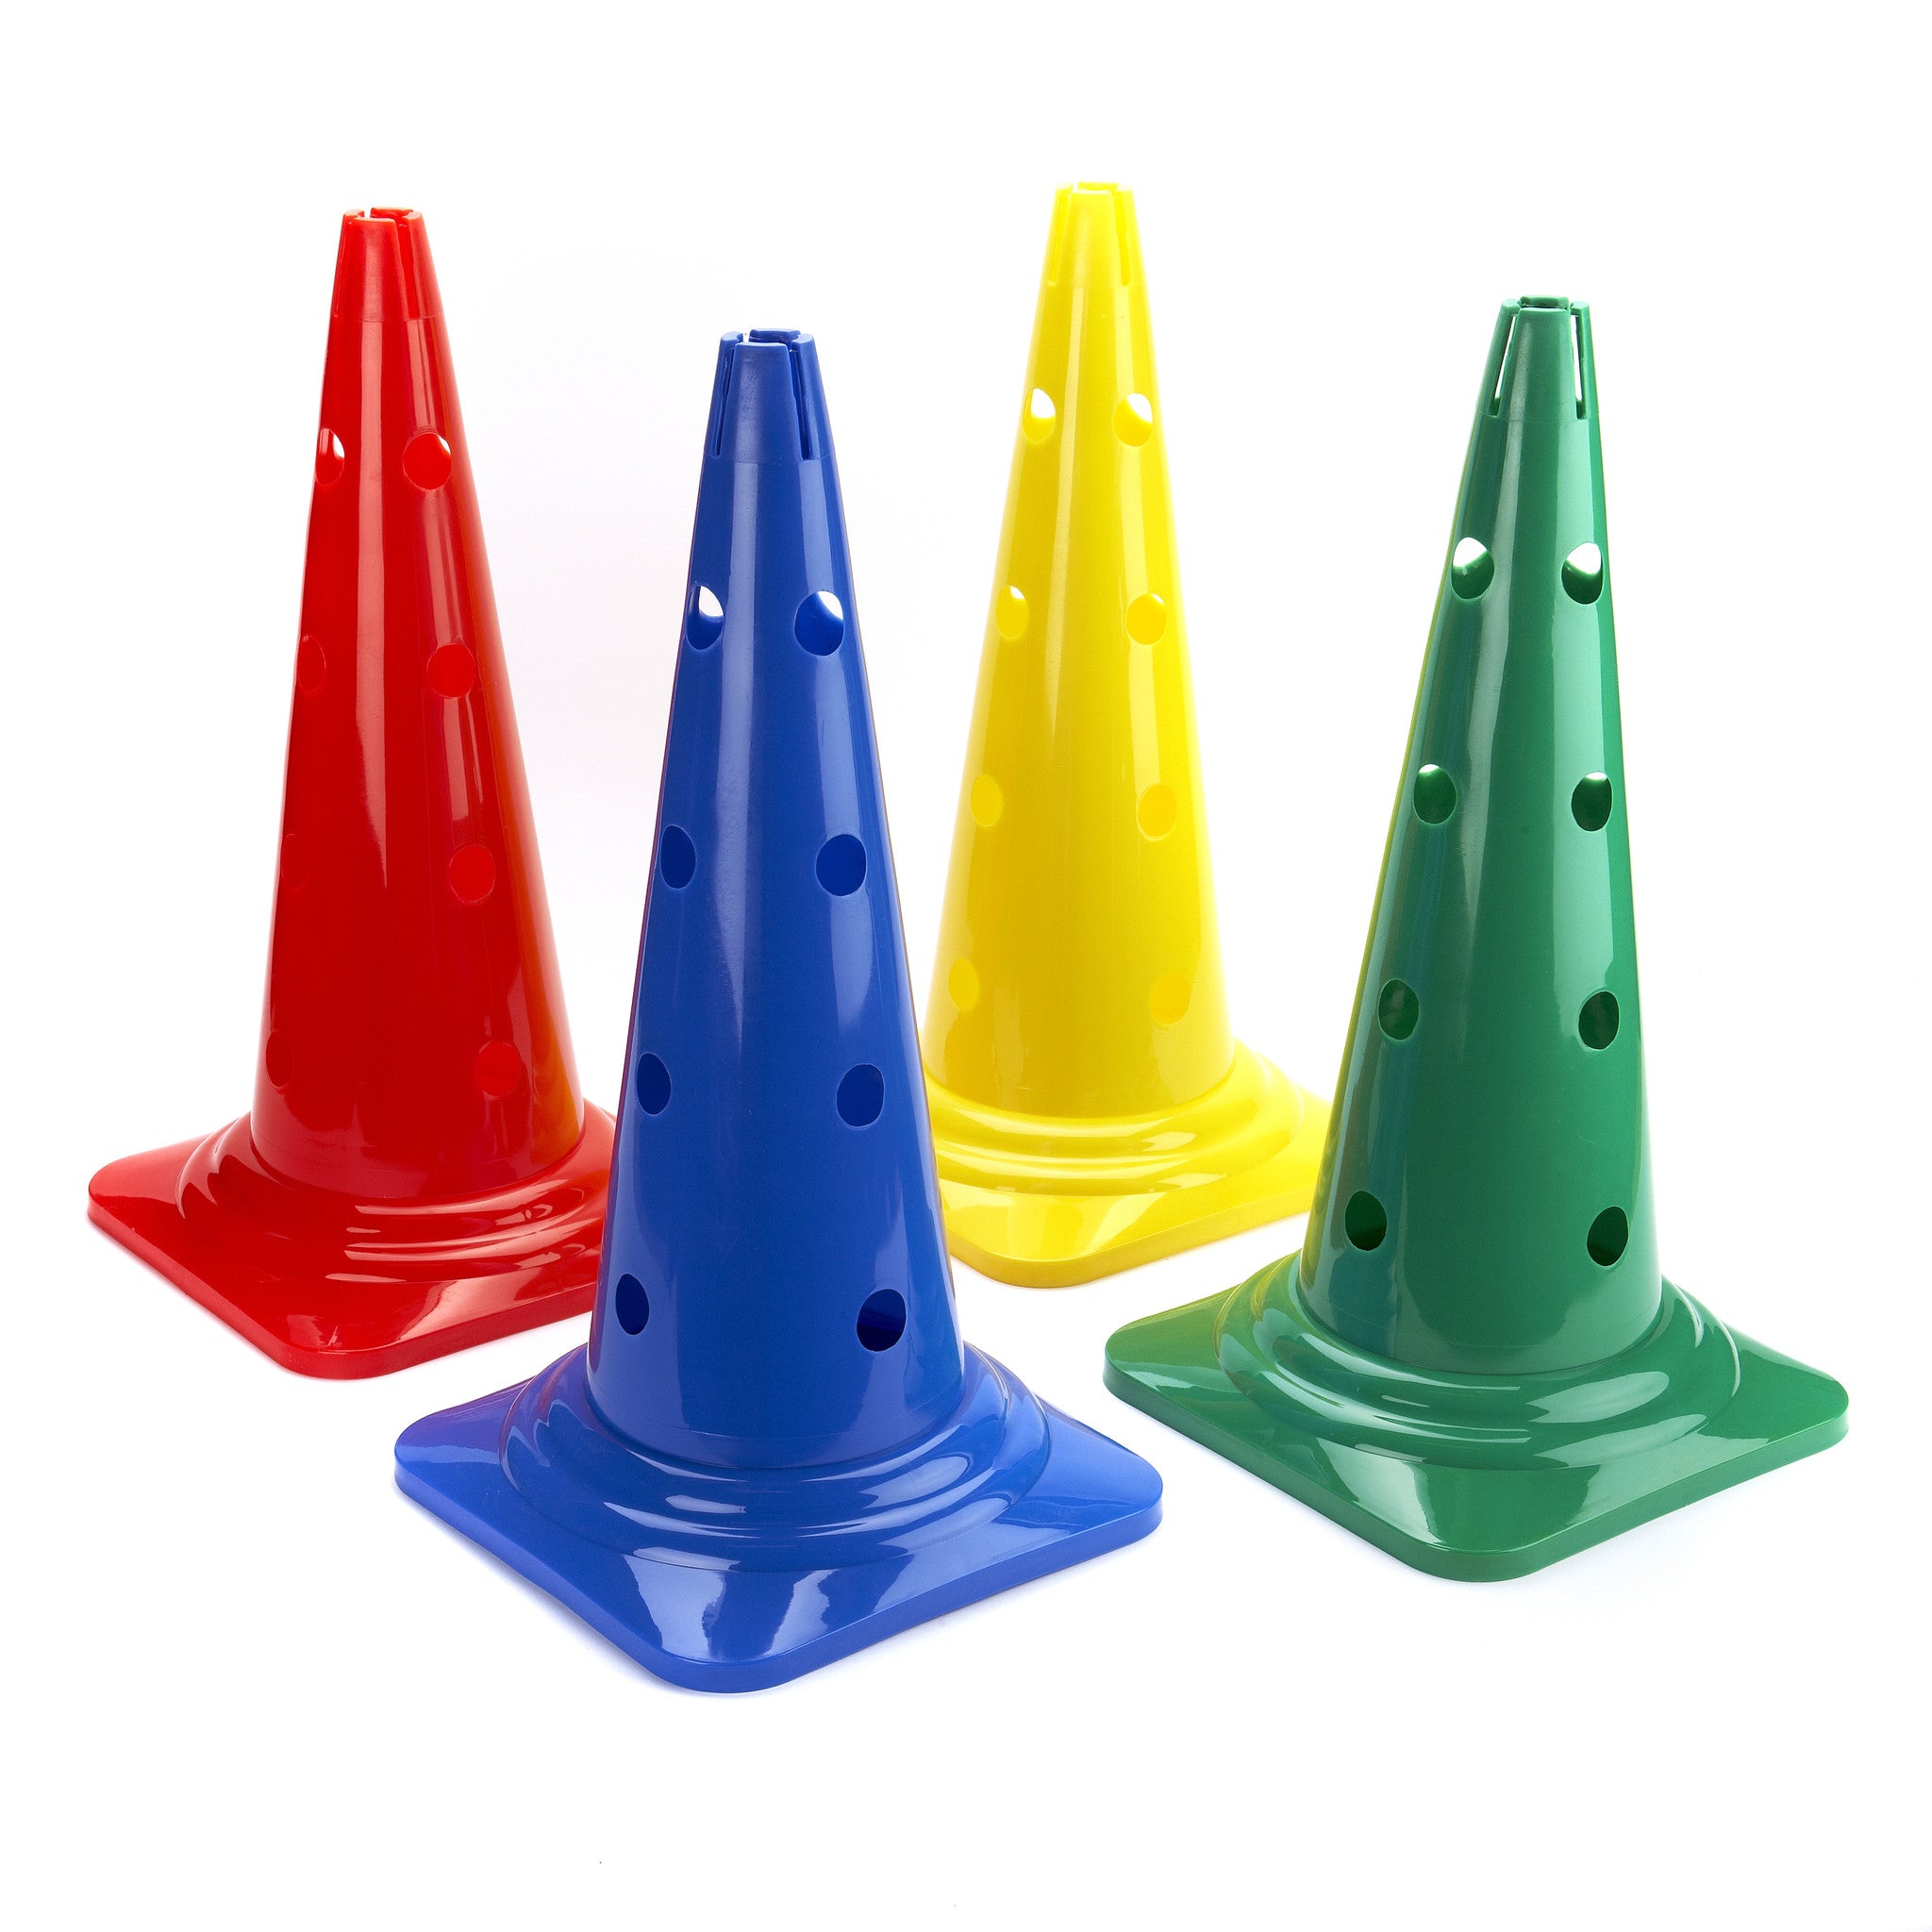 4 sports marker cones in blue, yellow, red & green. 50 cm tall rigid plastic with four parallel support holes for vertical poles per hoop, & groove at the top to place a ball for drills.